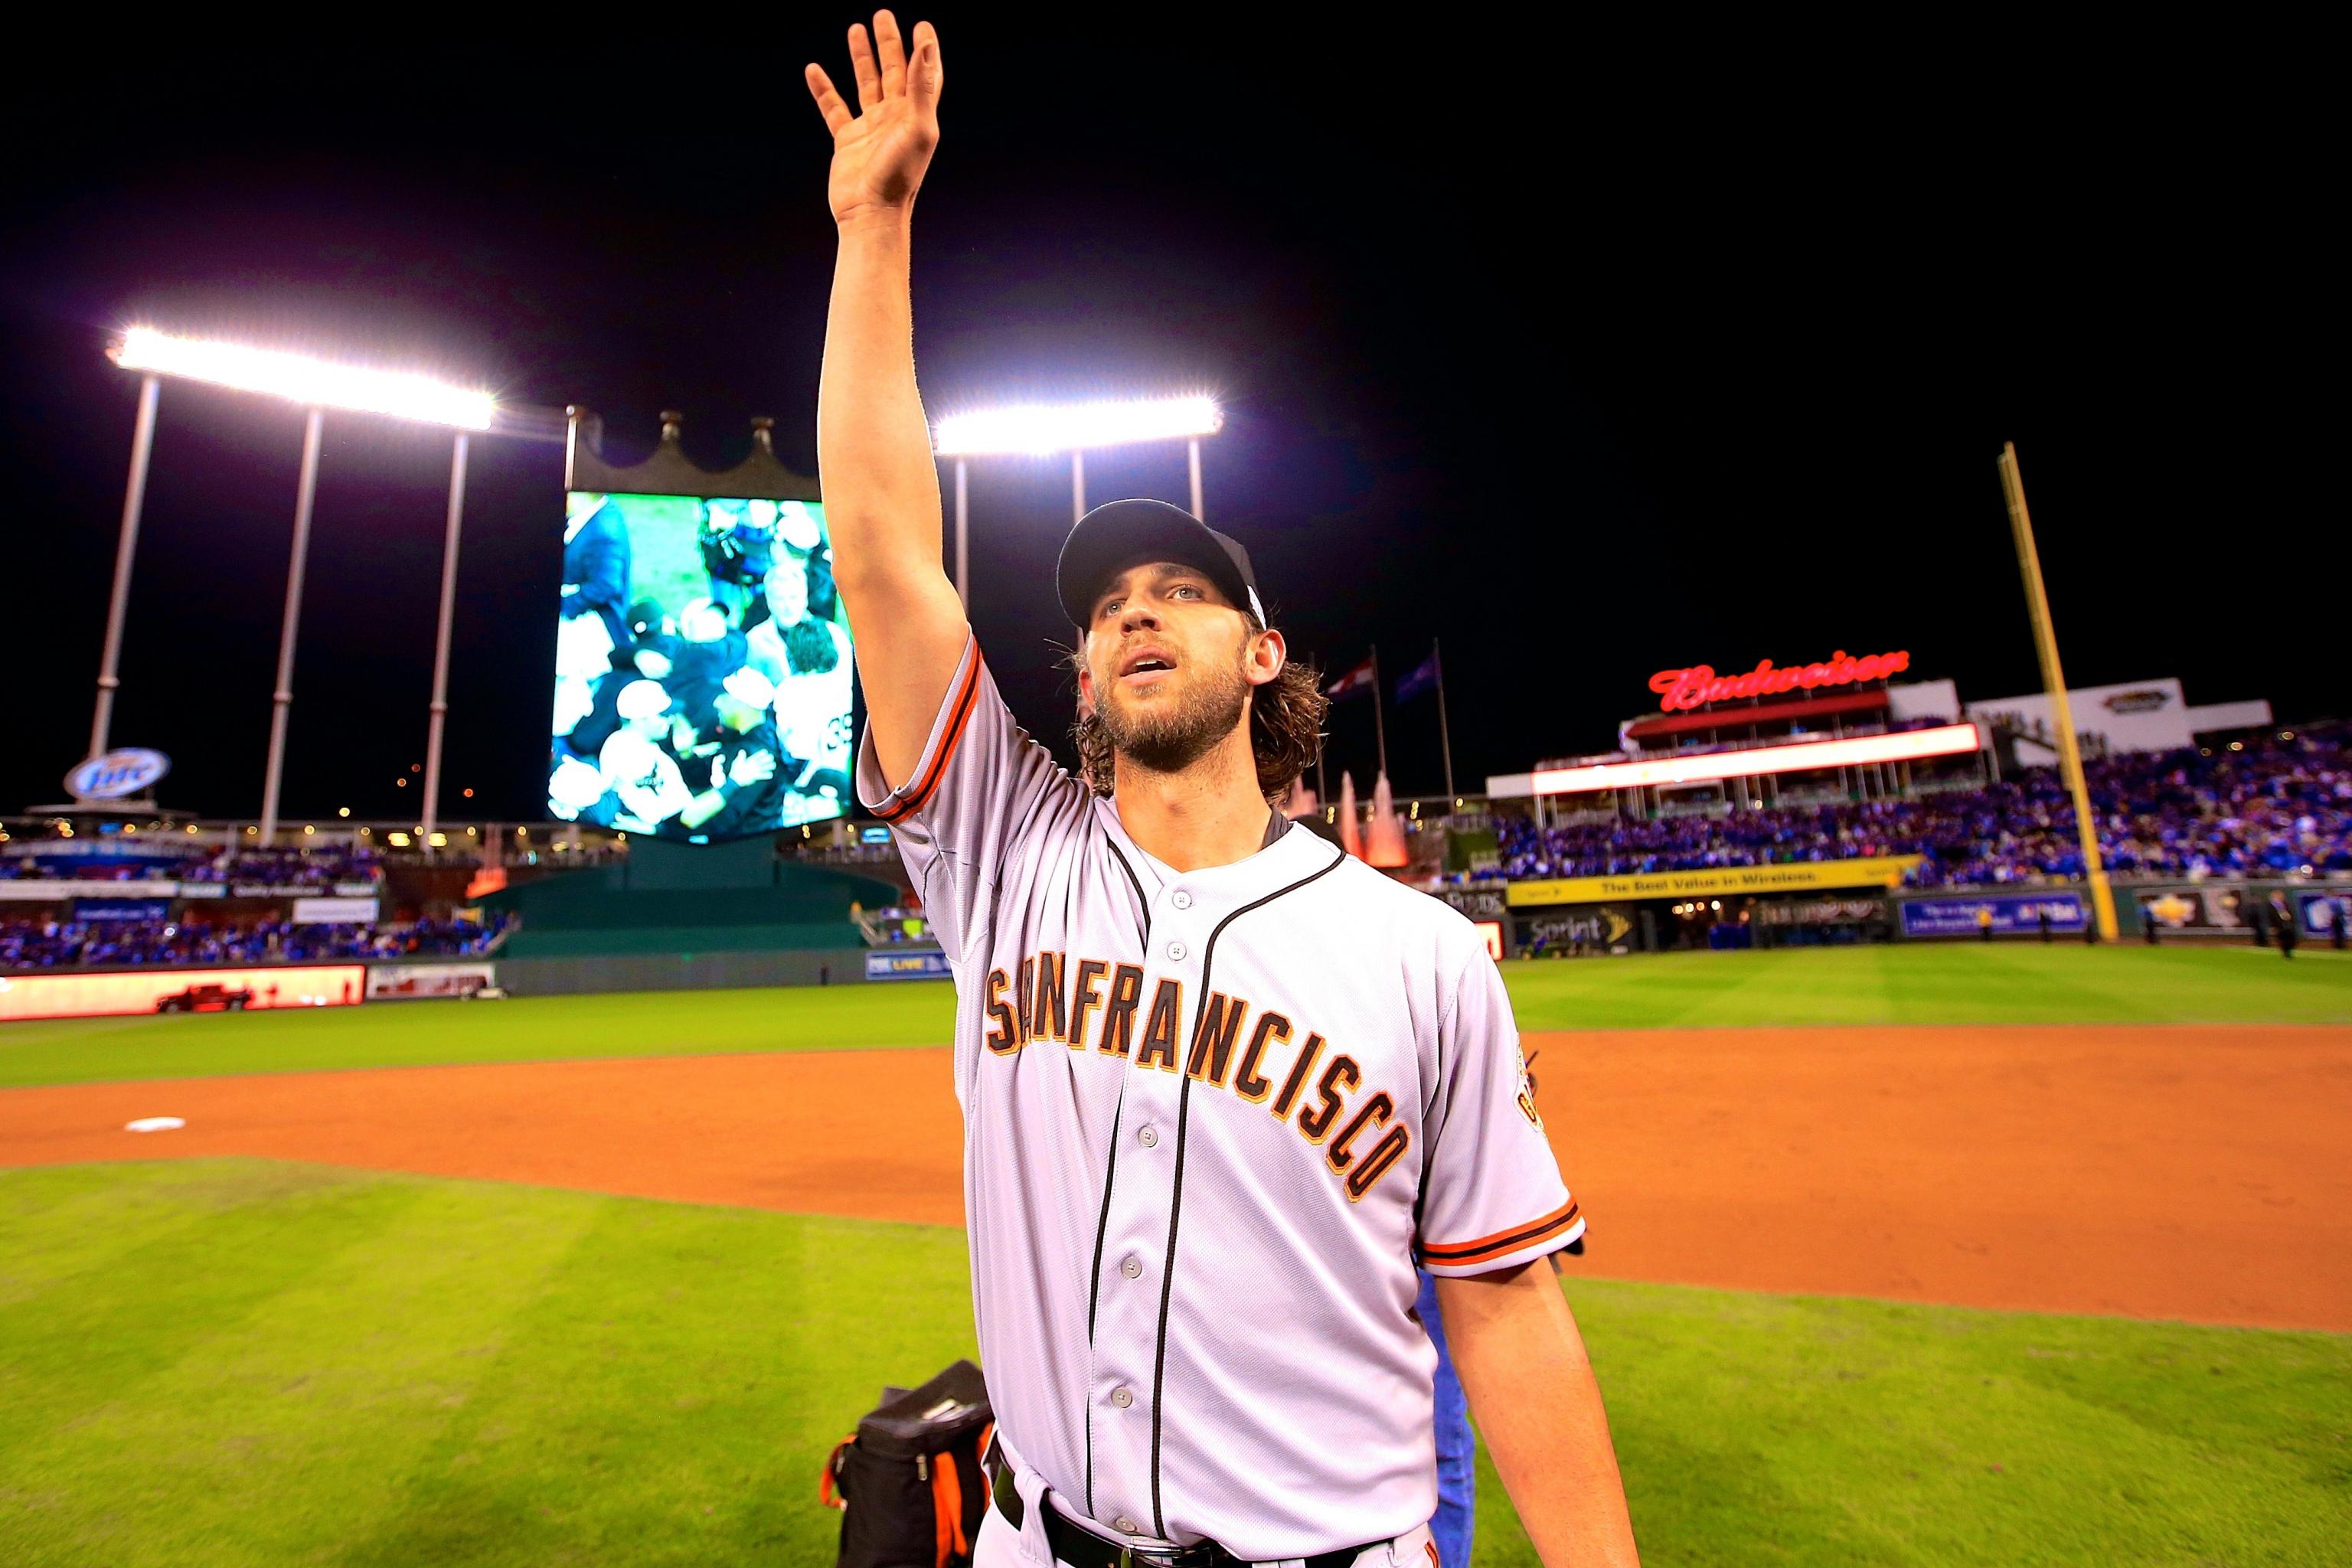 Madison Bumgarner Class of 2007 - Player Profile